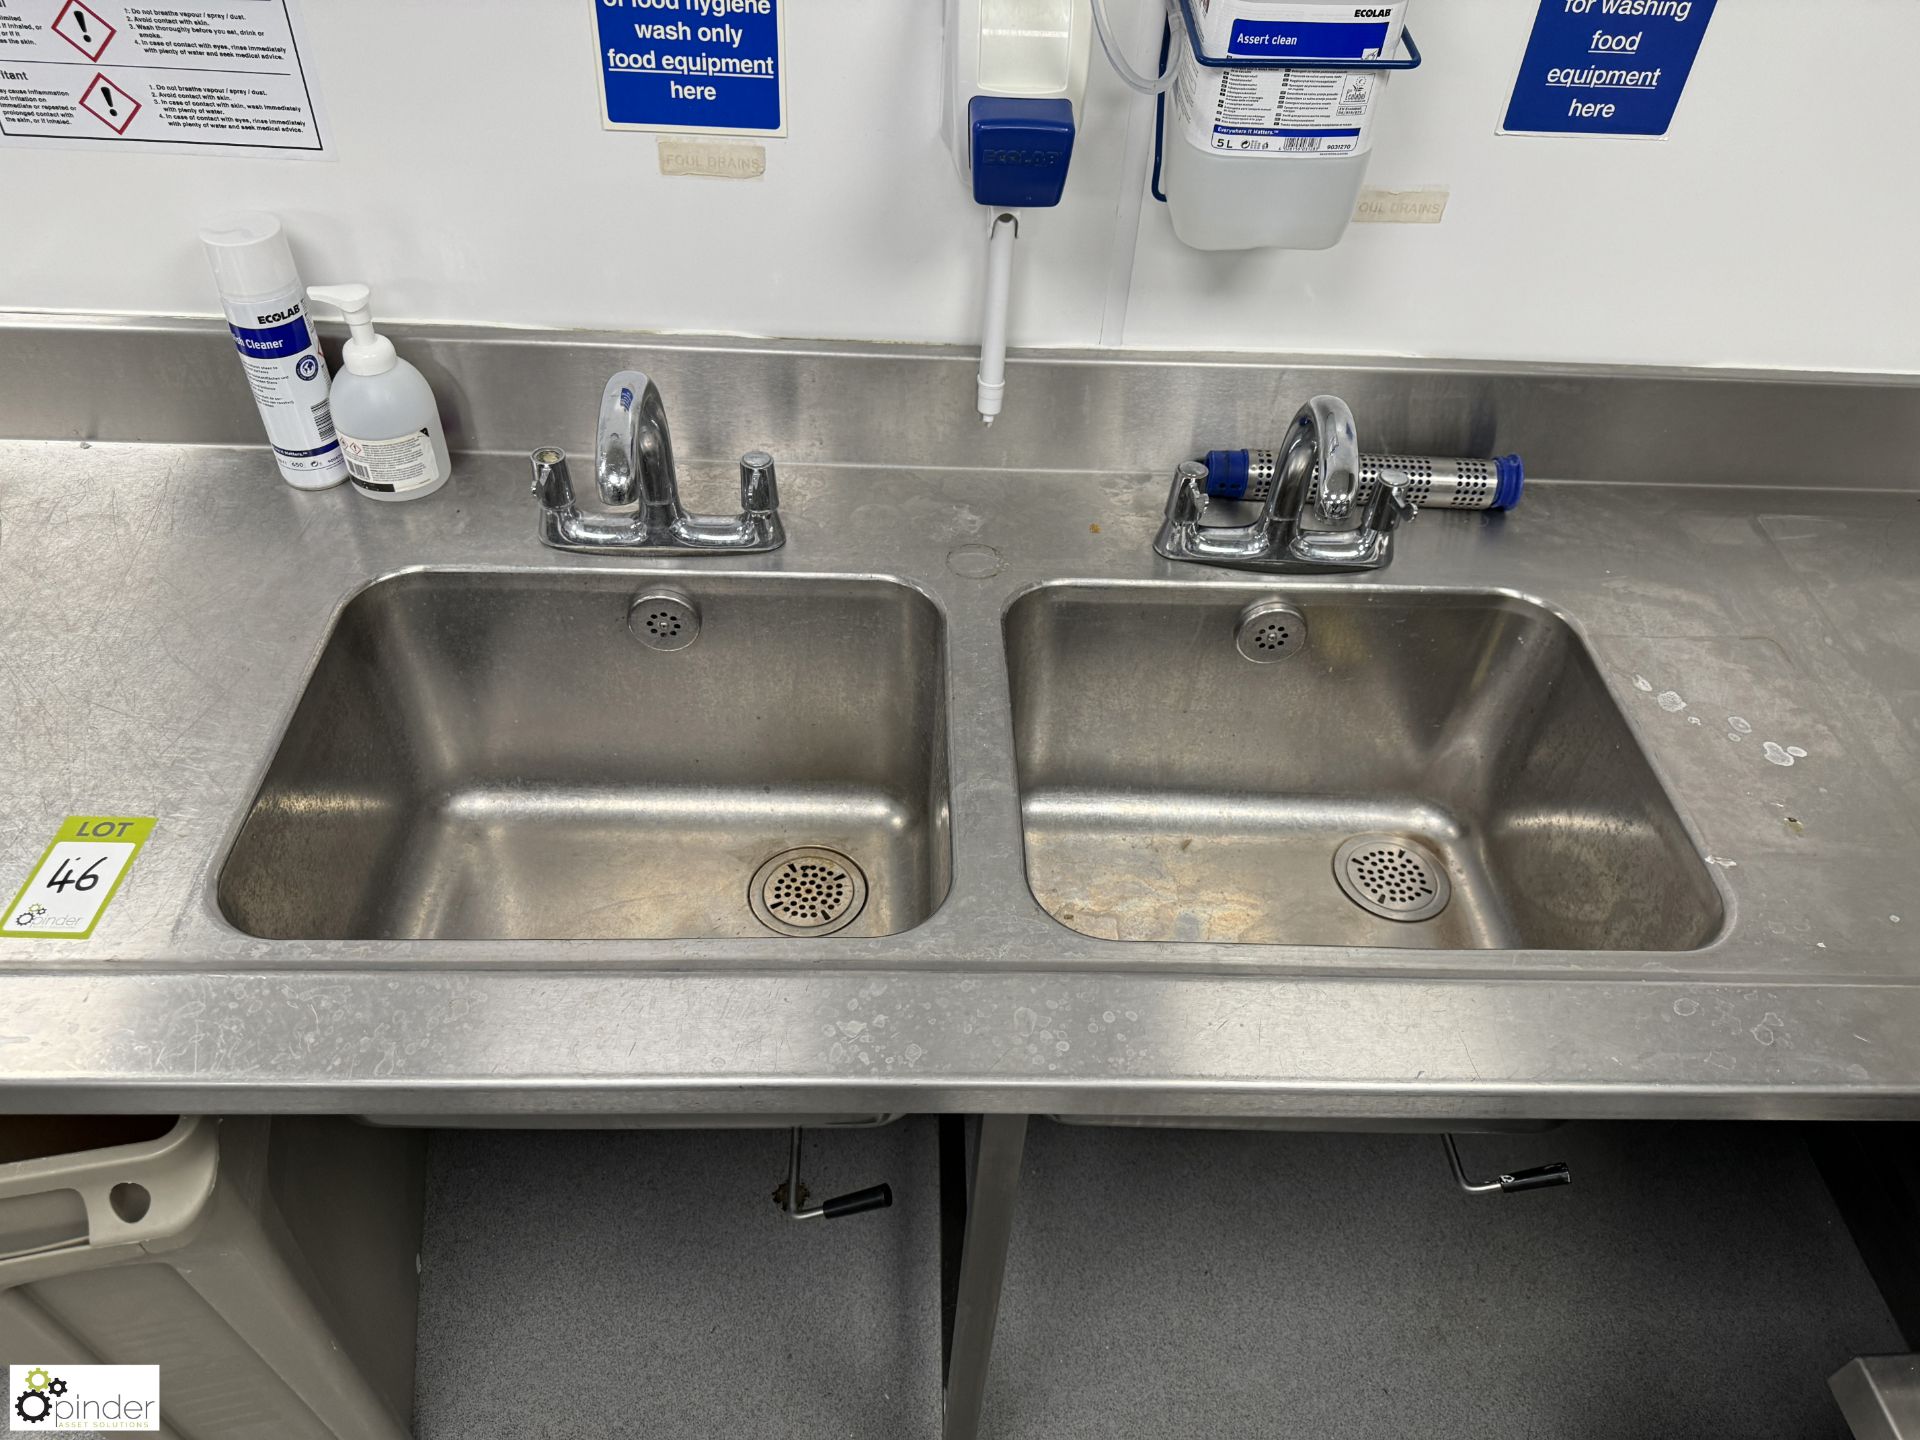 Stainless steel twin bowl Sink, 2270mm x 730mm x 900mm (location in building – basement kitchen 2) - Image 2 of 4